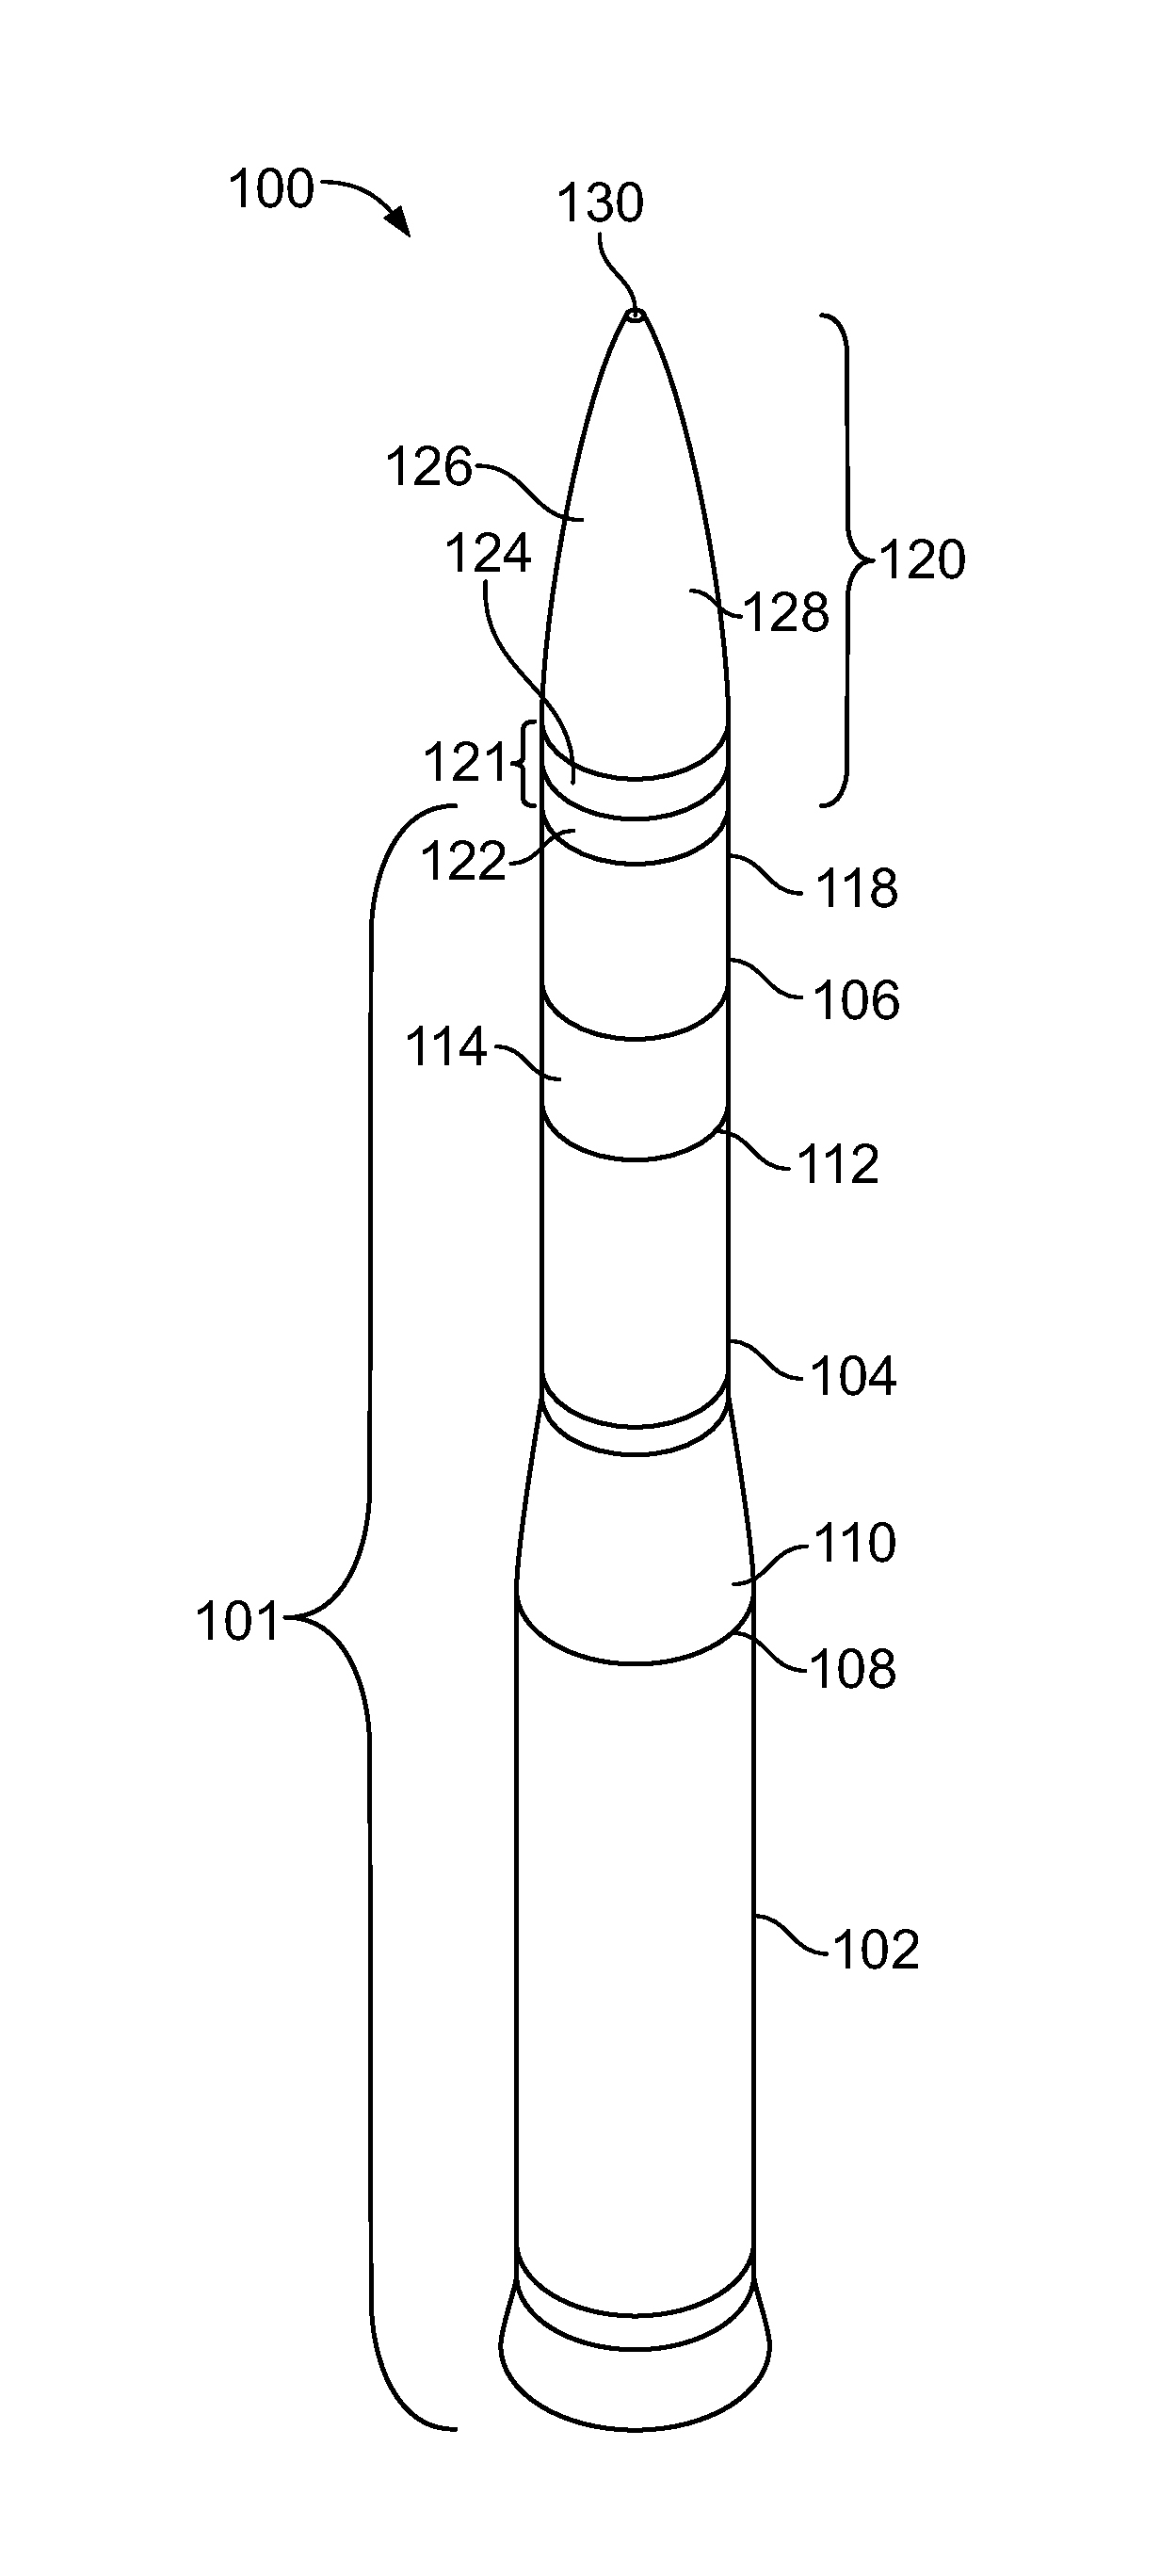 Methods of connecting testing equipment to a missile system